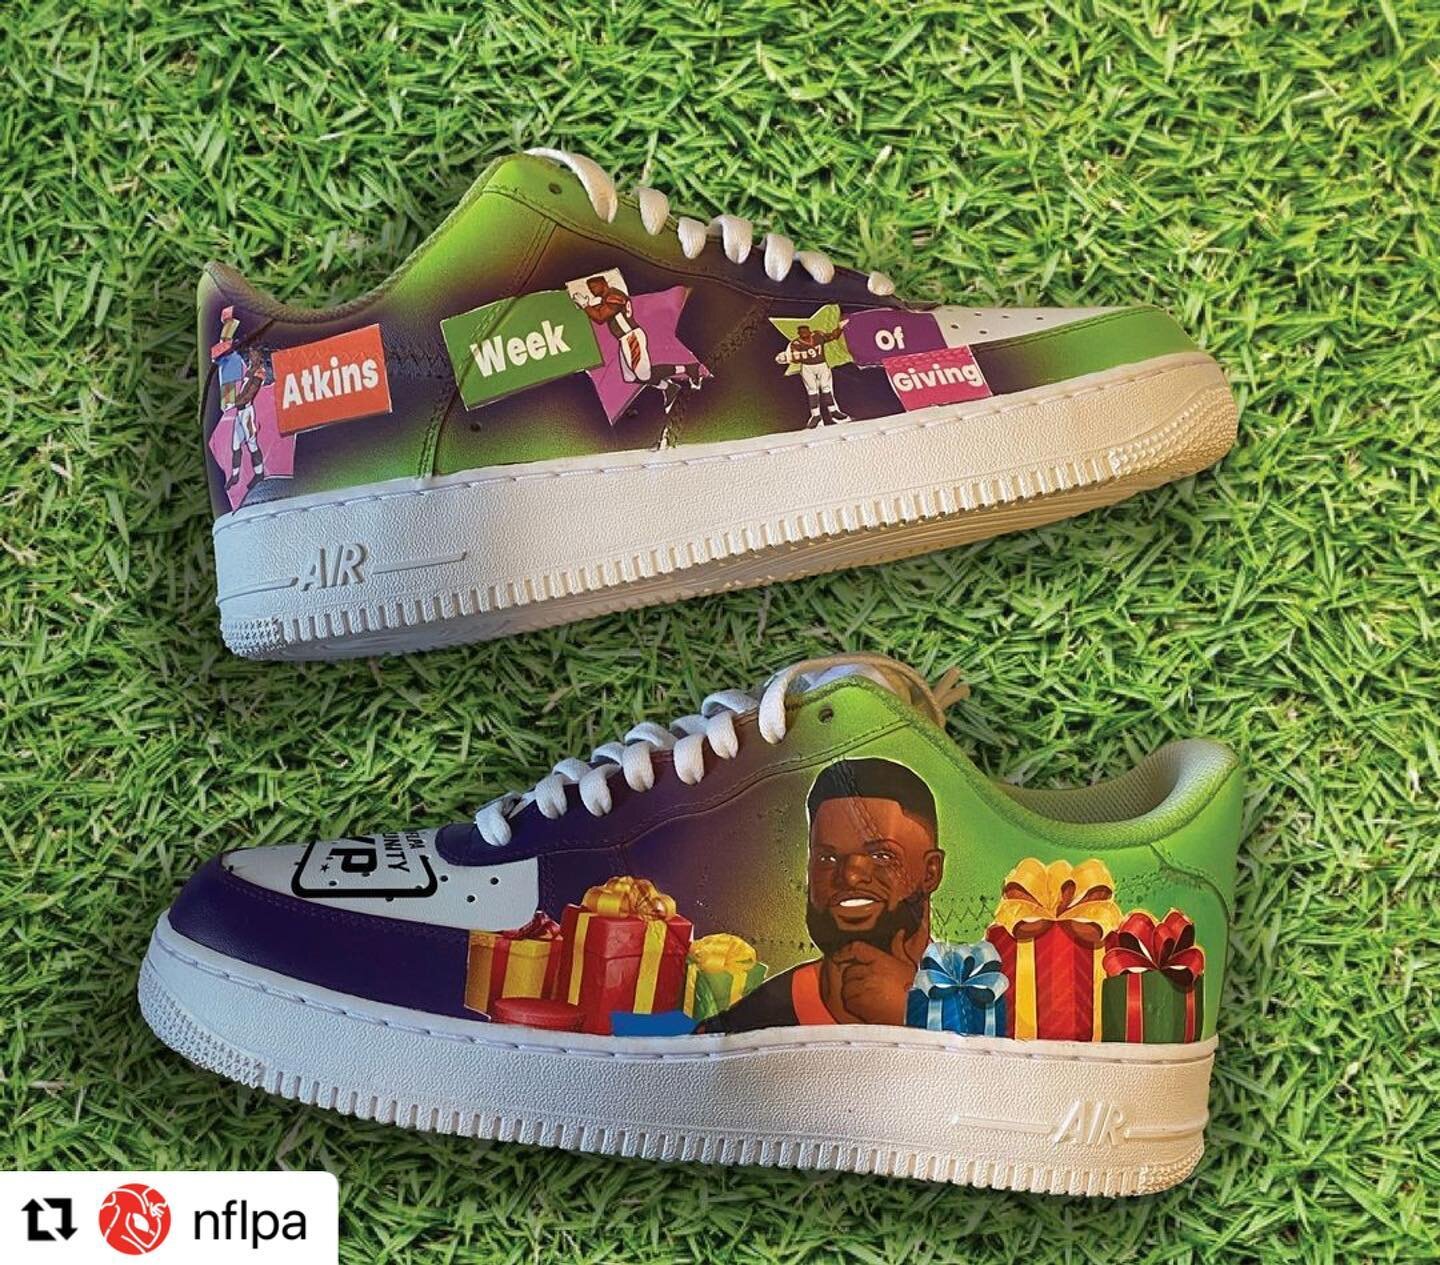 #Repost @nflpa
・・・
Custom kicks for our #CommunityMVPs 👟

This past season, each Community MVP winner was recognized for supporting their communities and in addition to a $10k contribution to their charity, is getting a custom pair of kicks to comme